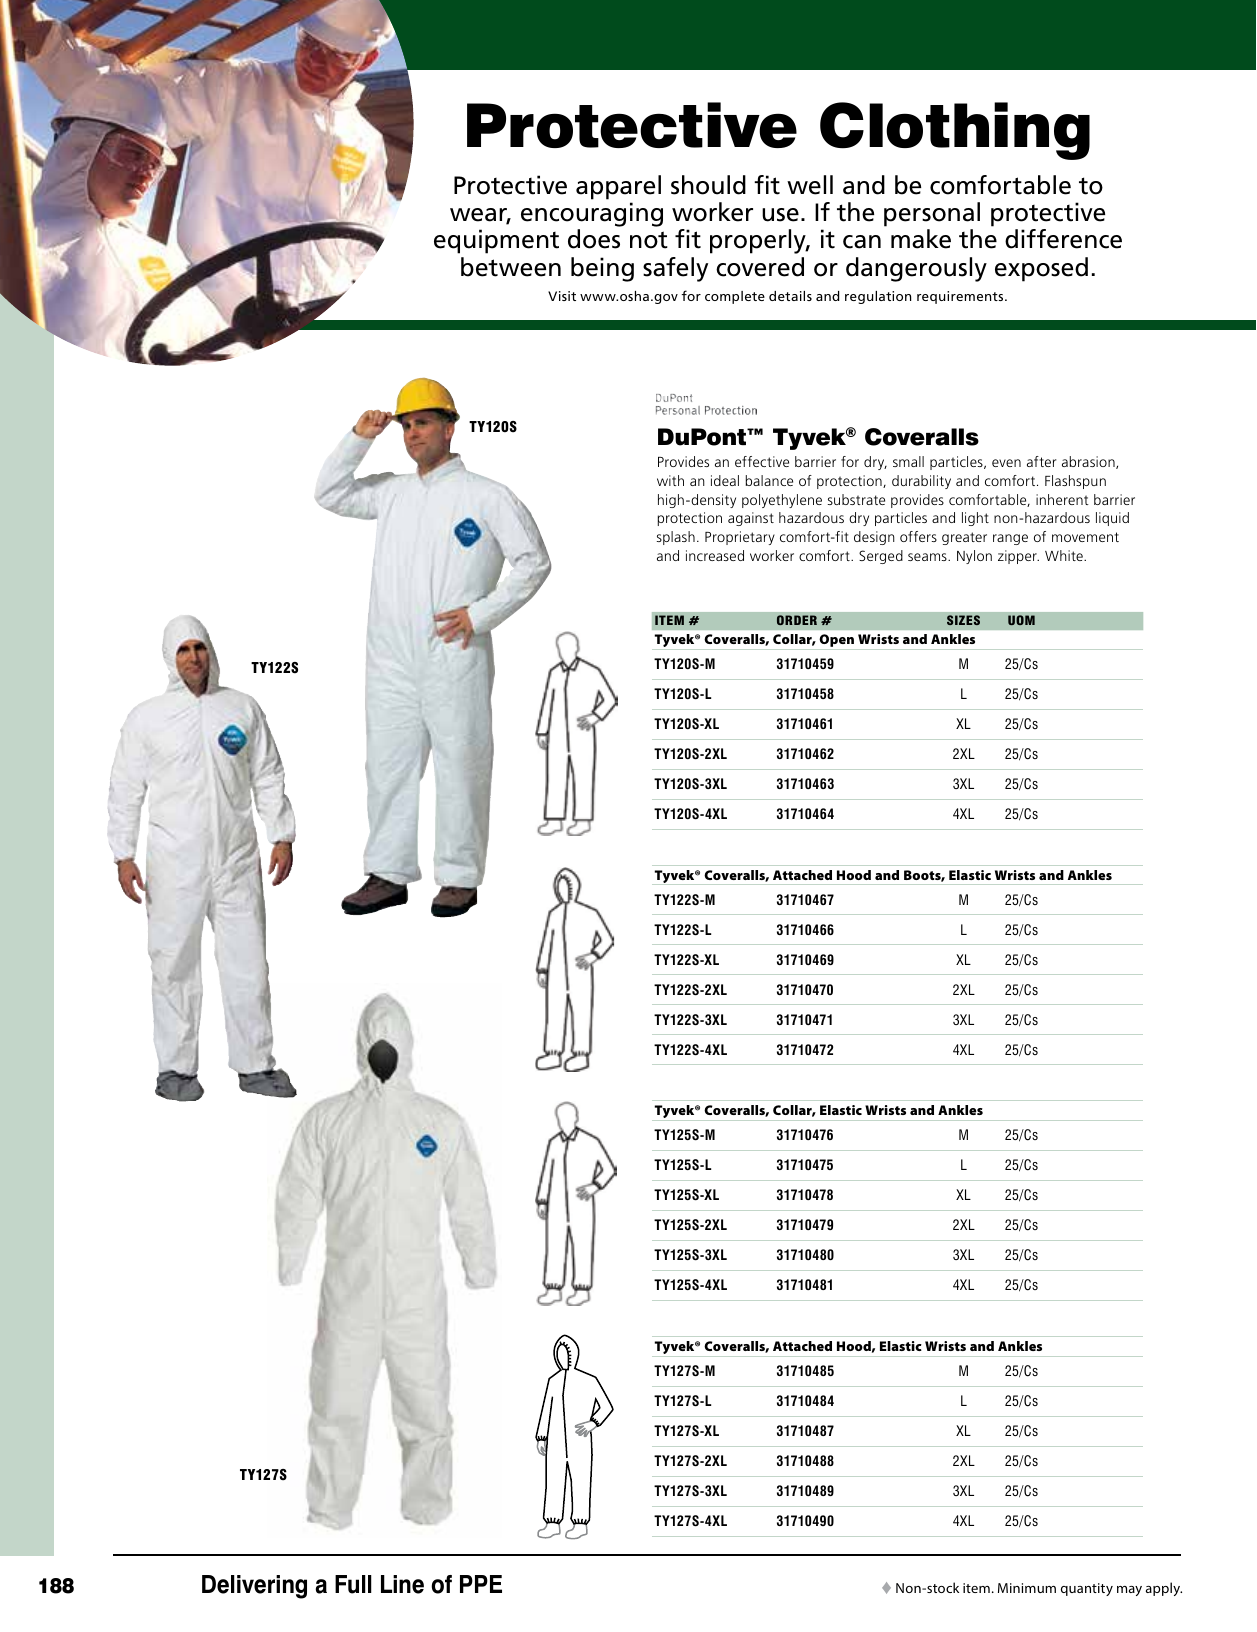 3M PROTECTIVE OVERSLEEVES 435 ELASTICATED CUFF COVERALL MEDICAL CLEANROOM DIY